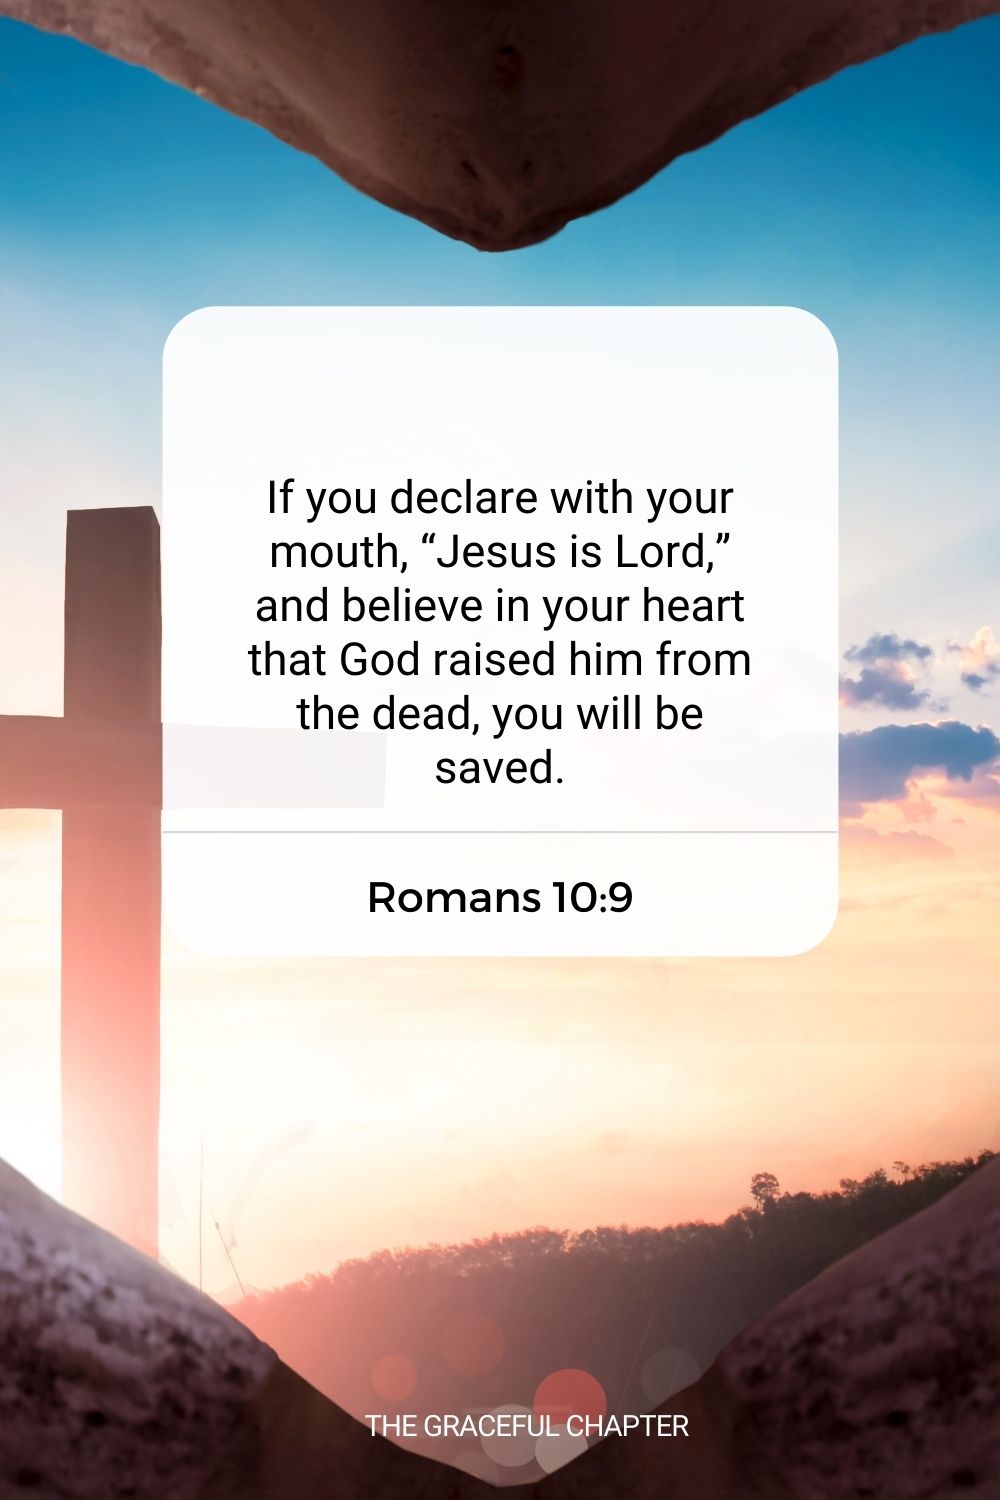 If you declare with your mouth, “Jesus is Lord,” and believe in your heart that God raised him from the dead, you will be saved. Romans 10:9